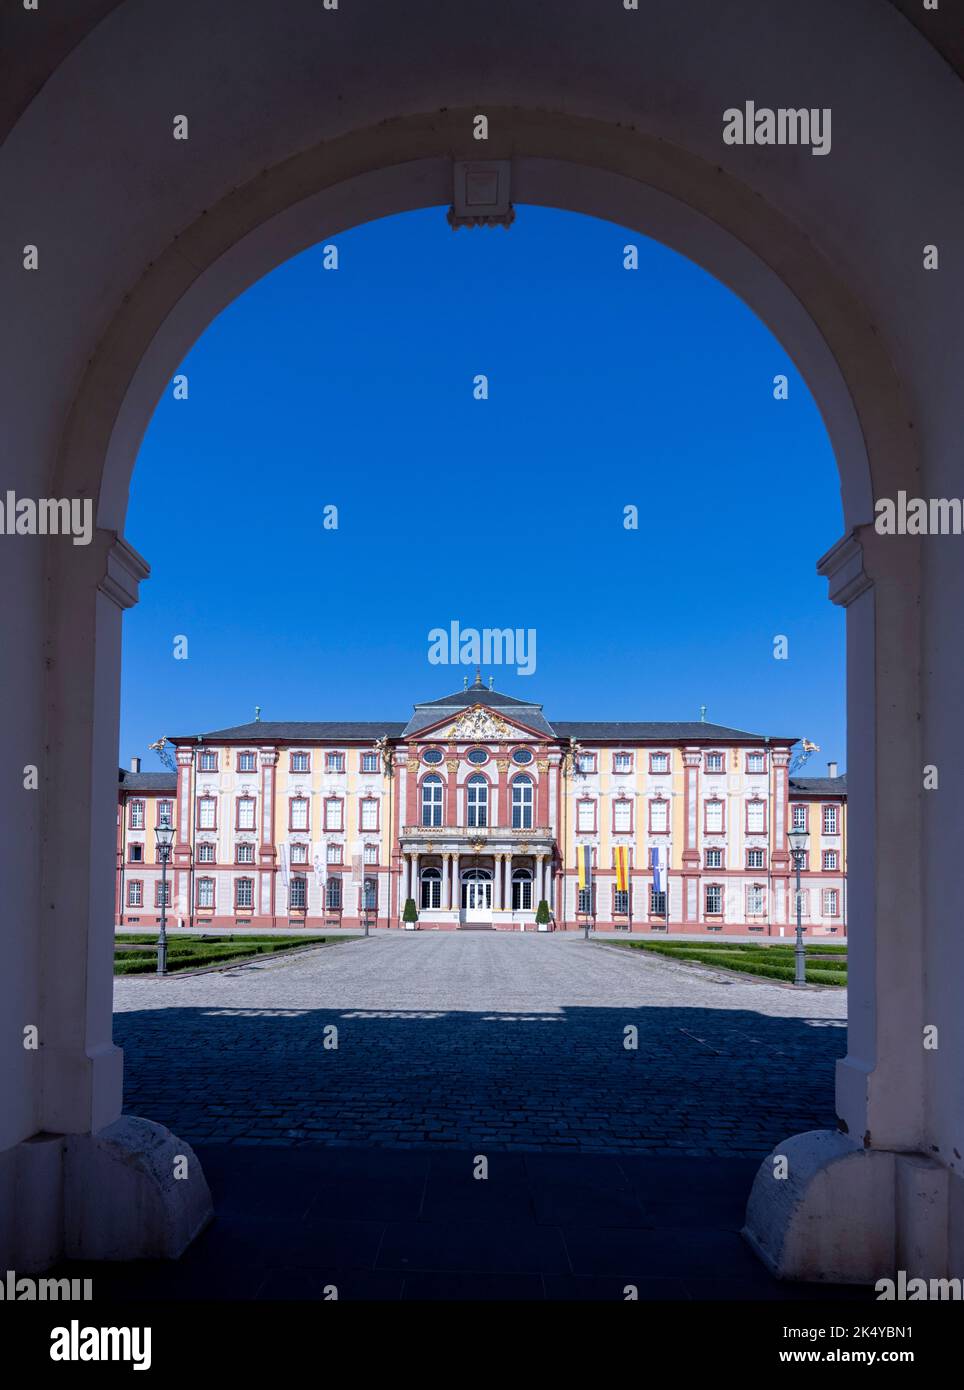 The corps de logis of the Baroque Bruchsal Palace (Schloss Bruchsal), also called the Damiansburg, in Bruchsal, Germany Stock Photo